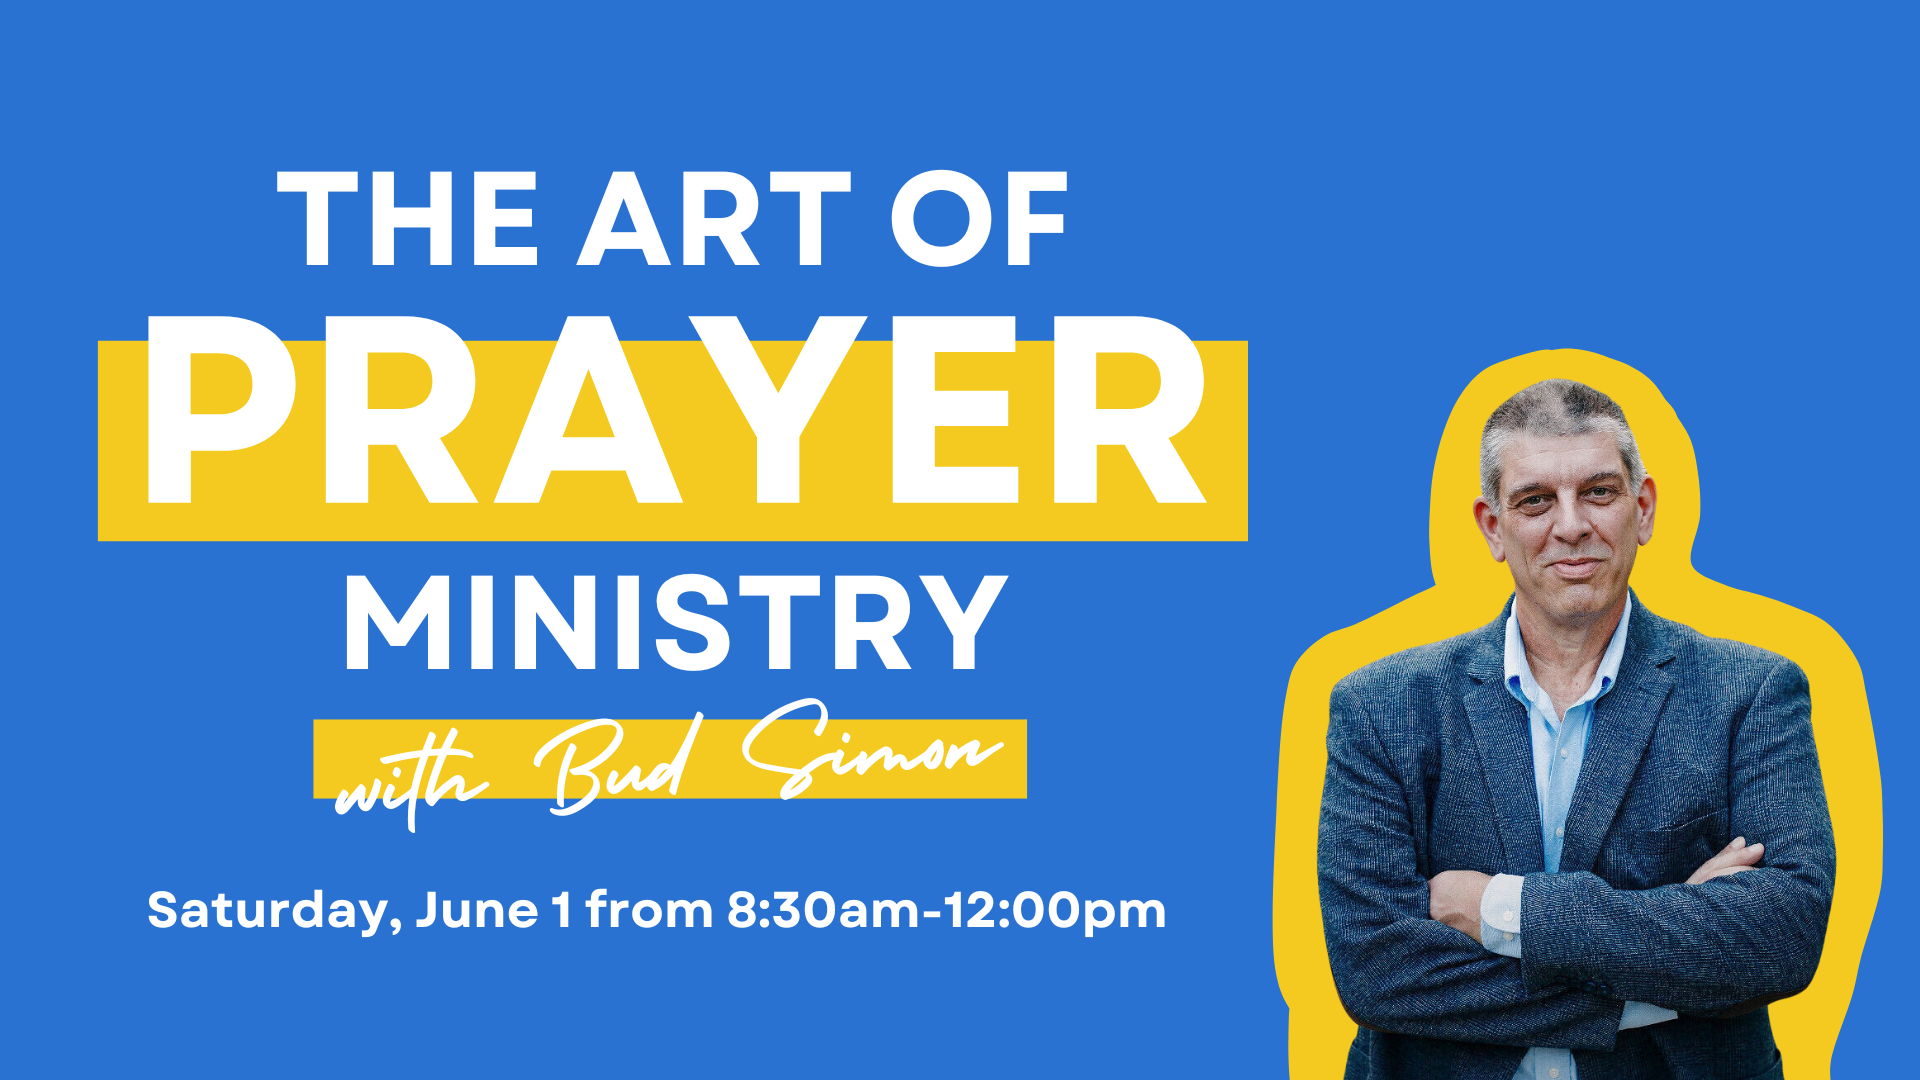 The Art of Prayer Ministry with Bud Simon